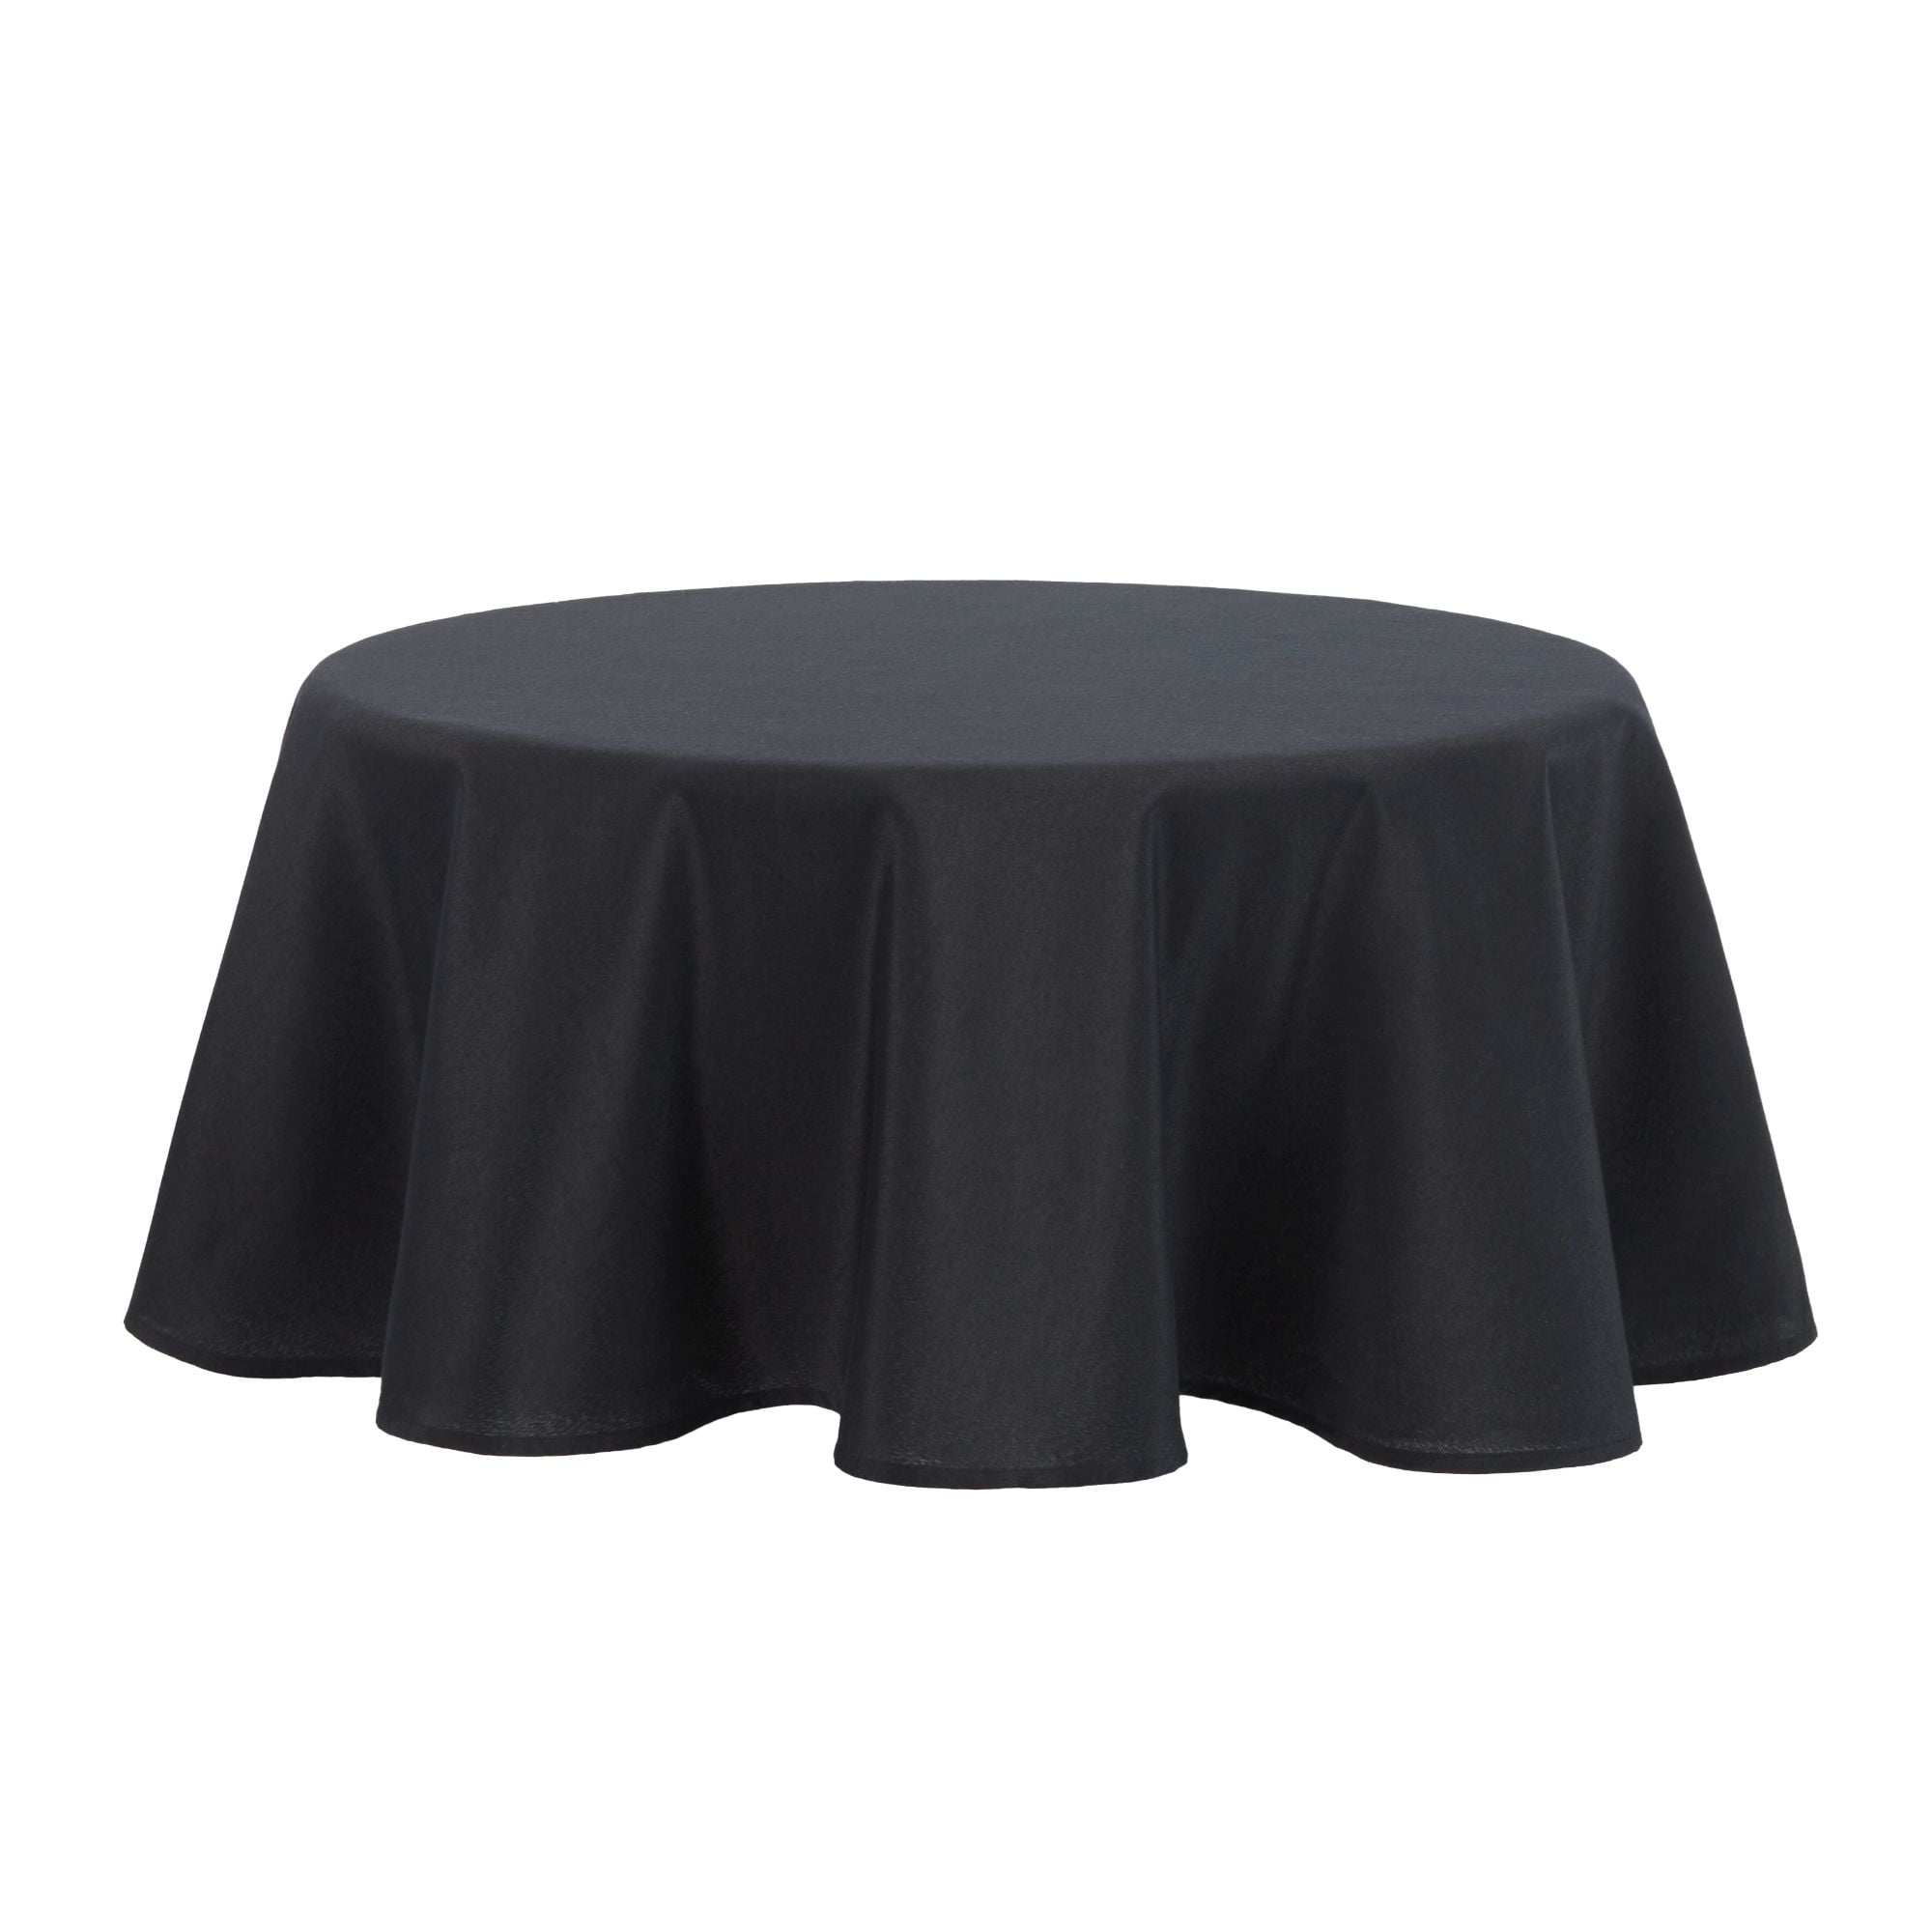 Mainstays Yale Tablecloth, Black, 70" Round, Available in various sizes and colors